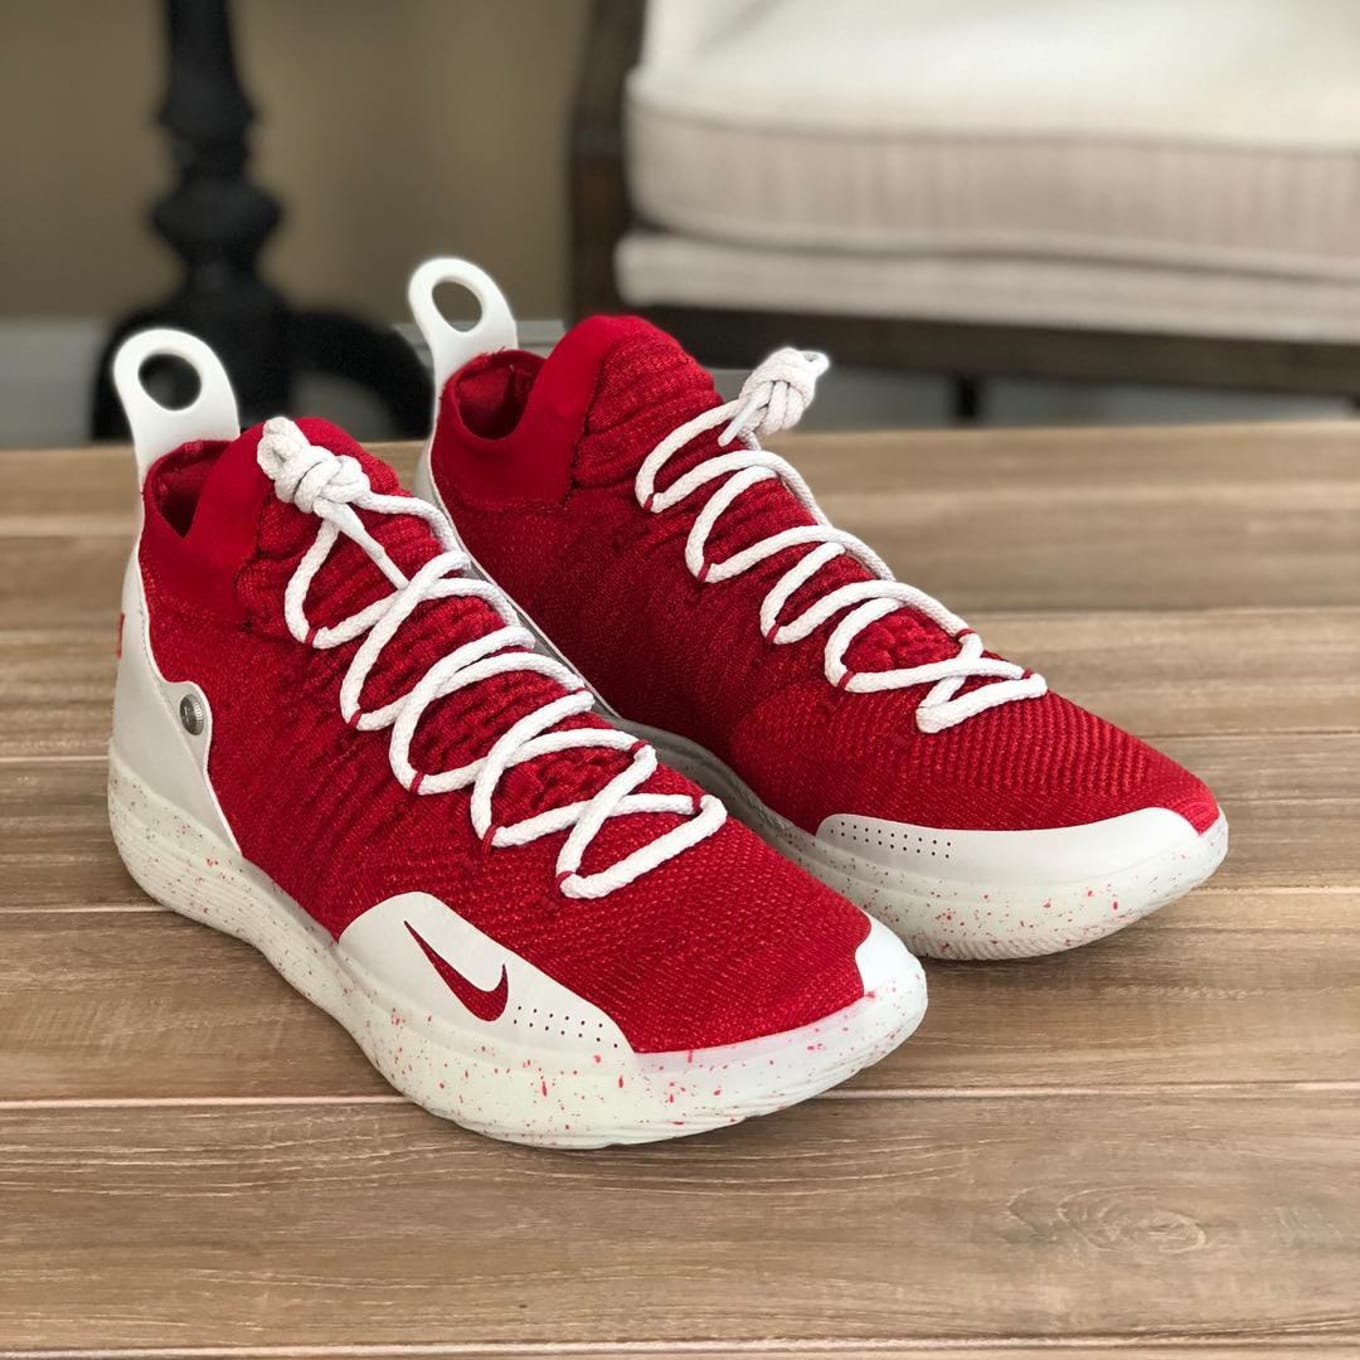 kd 11 red